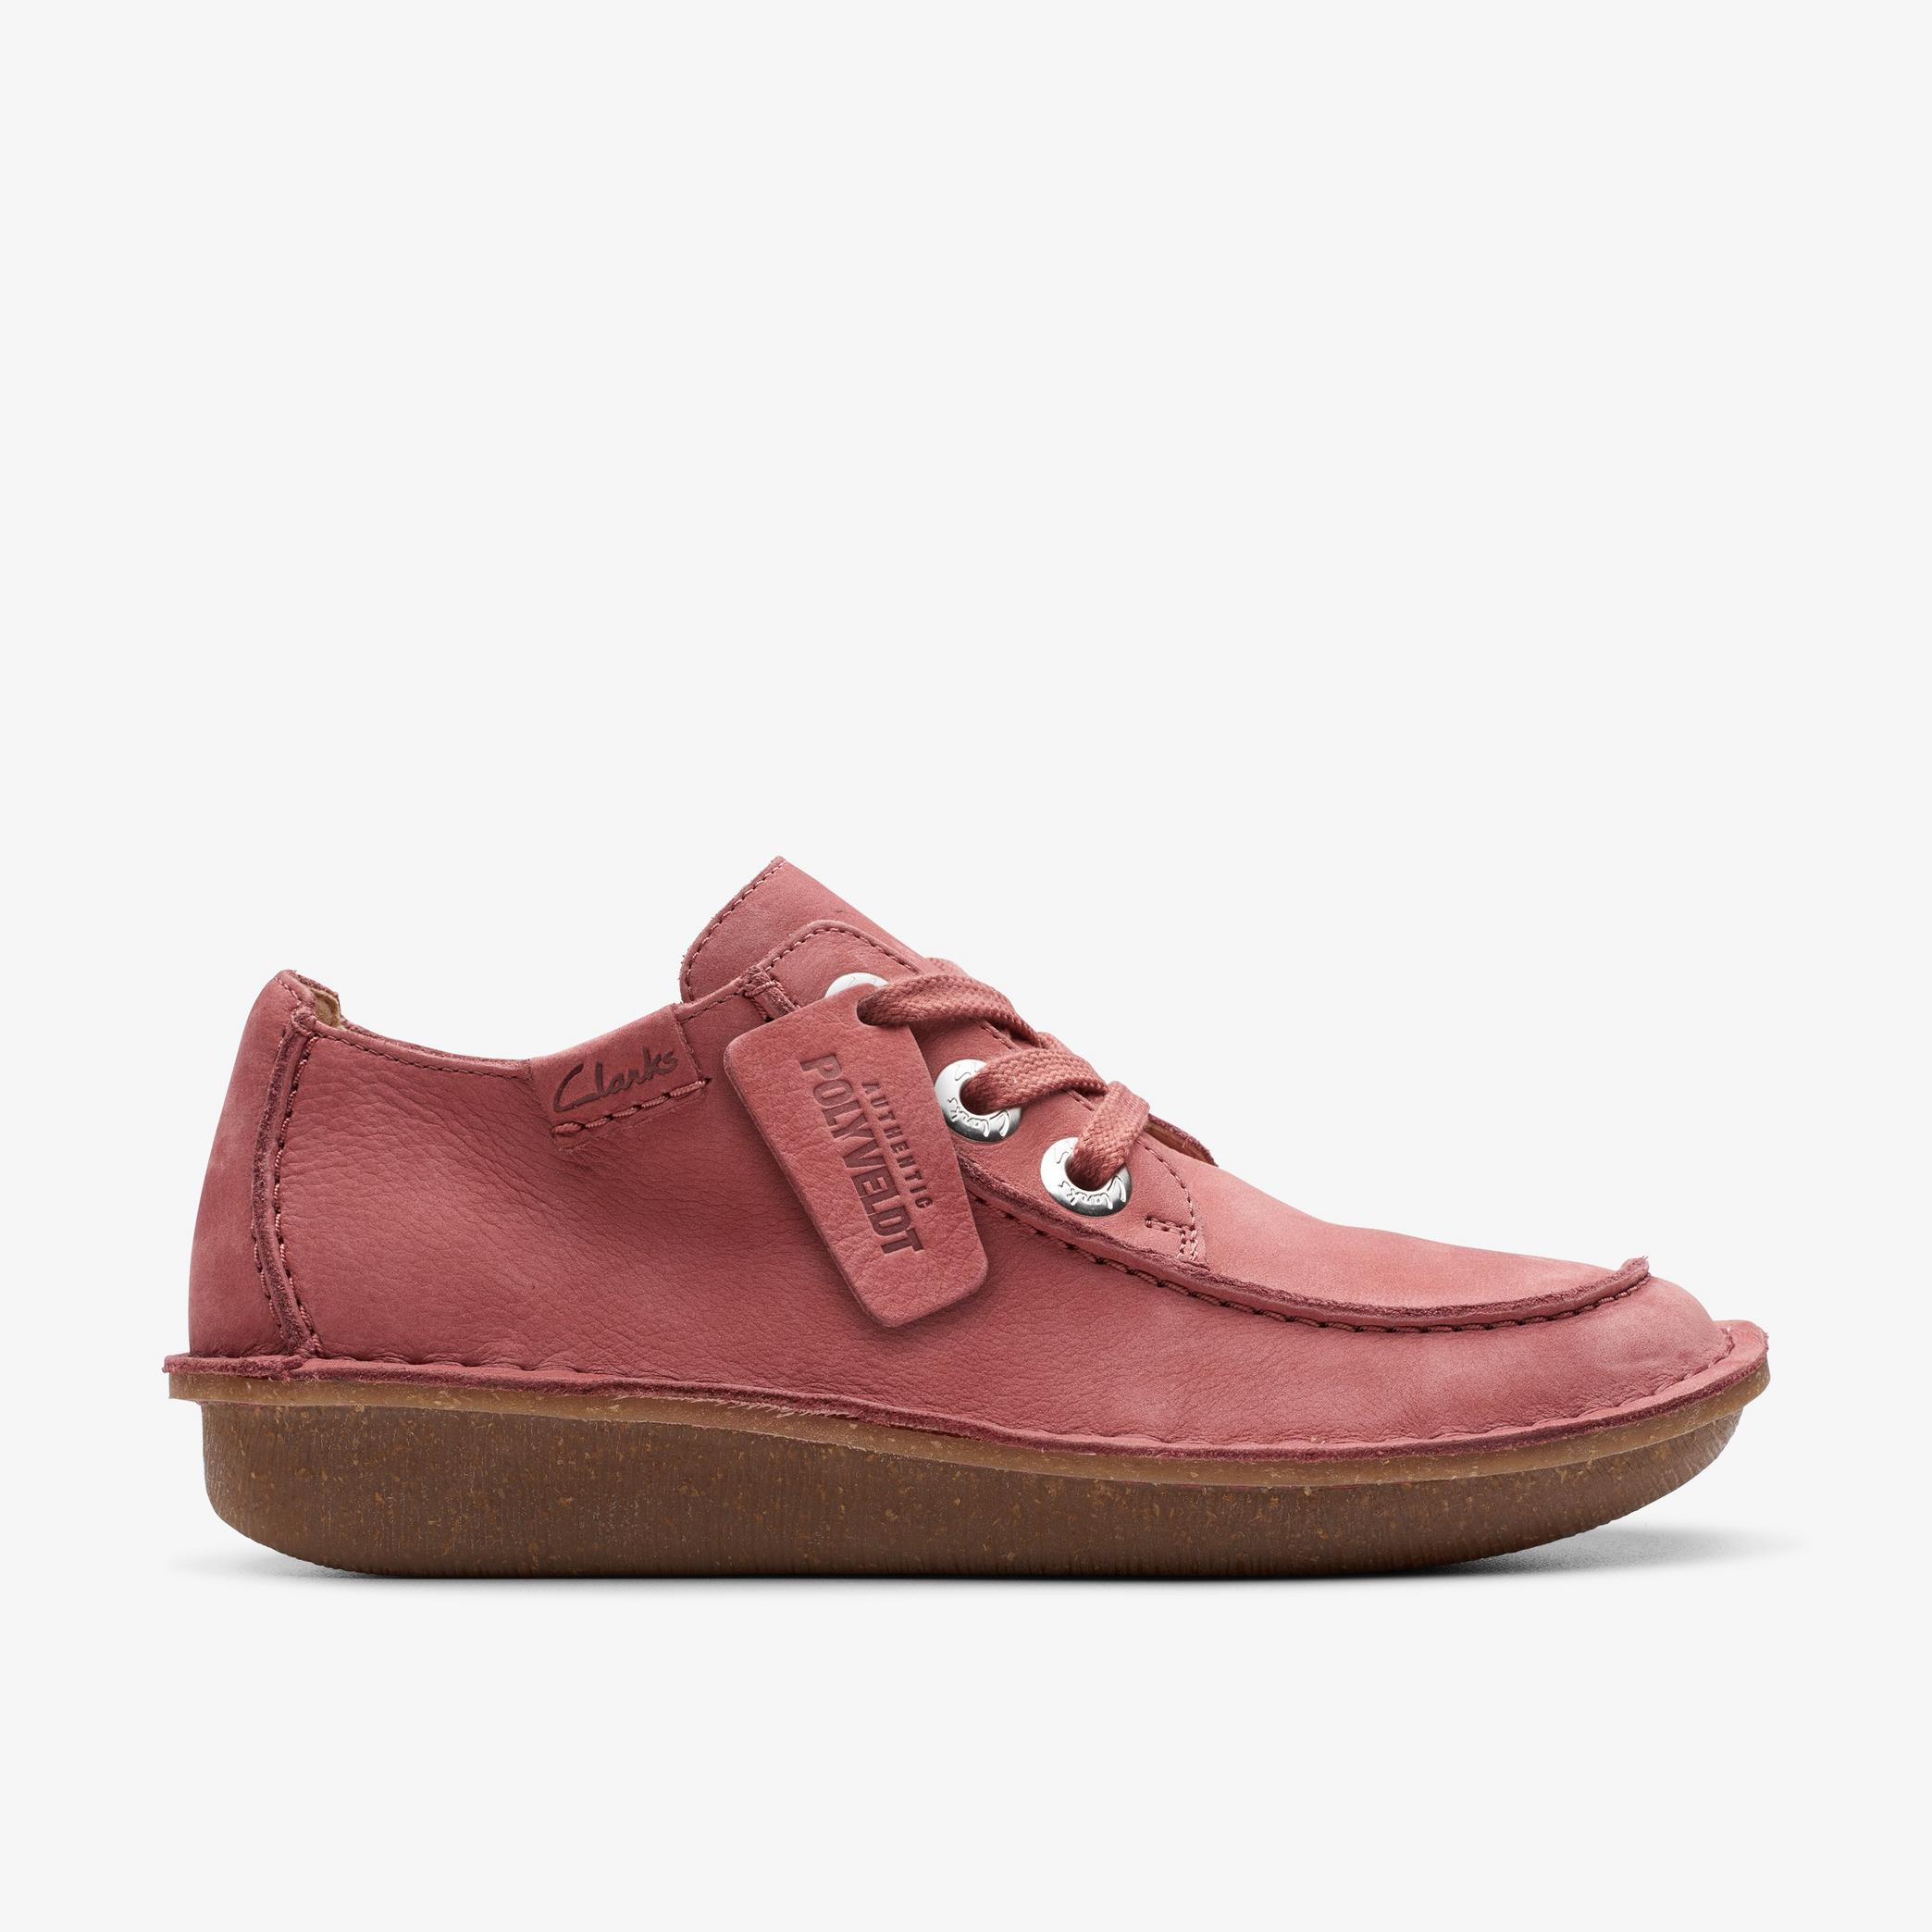 Funny Dream Dusty Rose Nubuck Derby Shoes, view 1 of 6